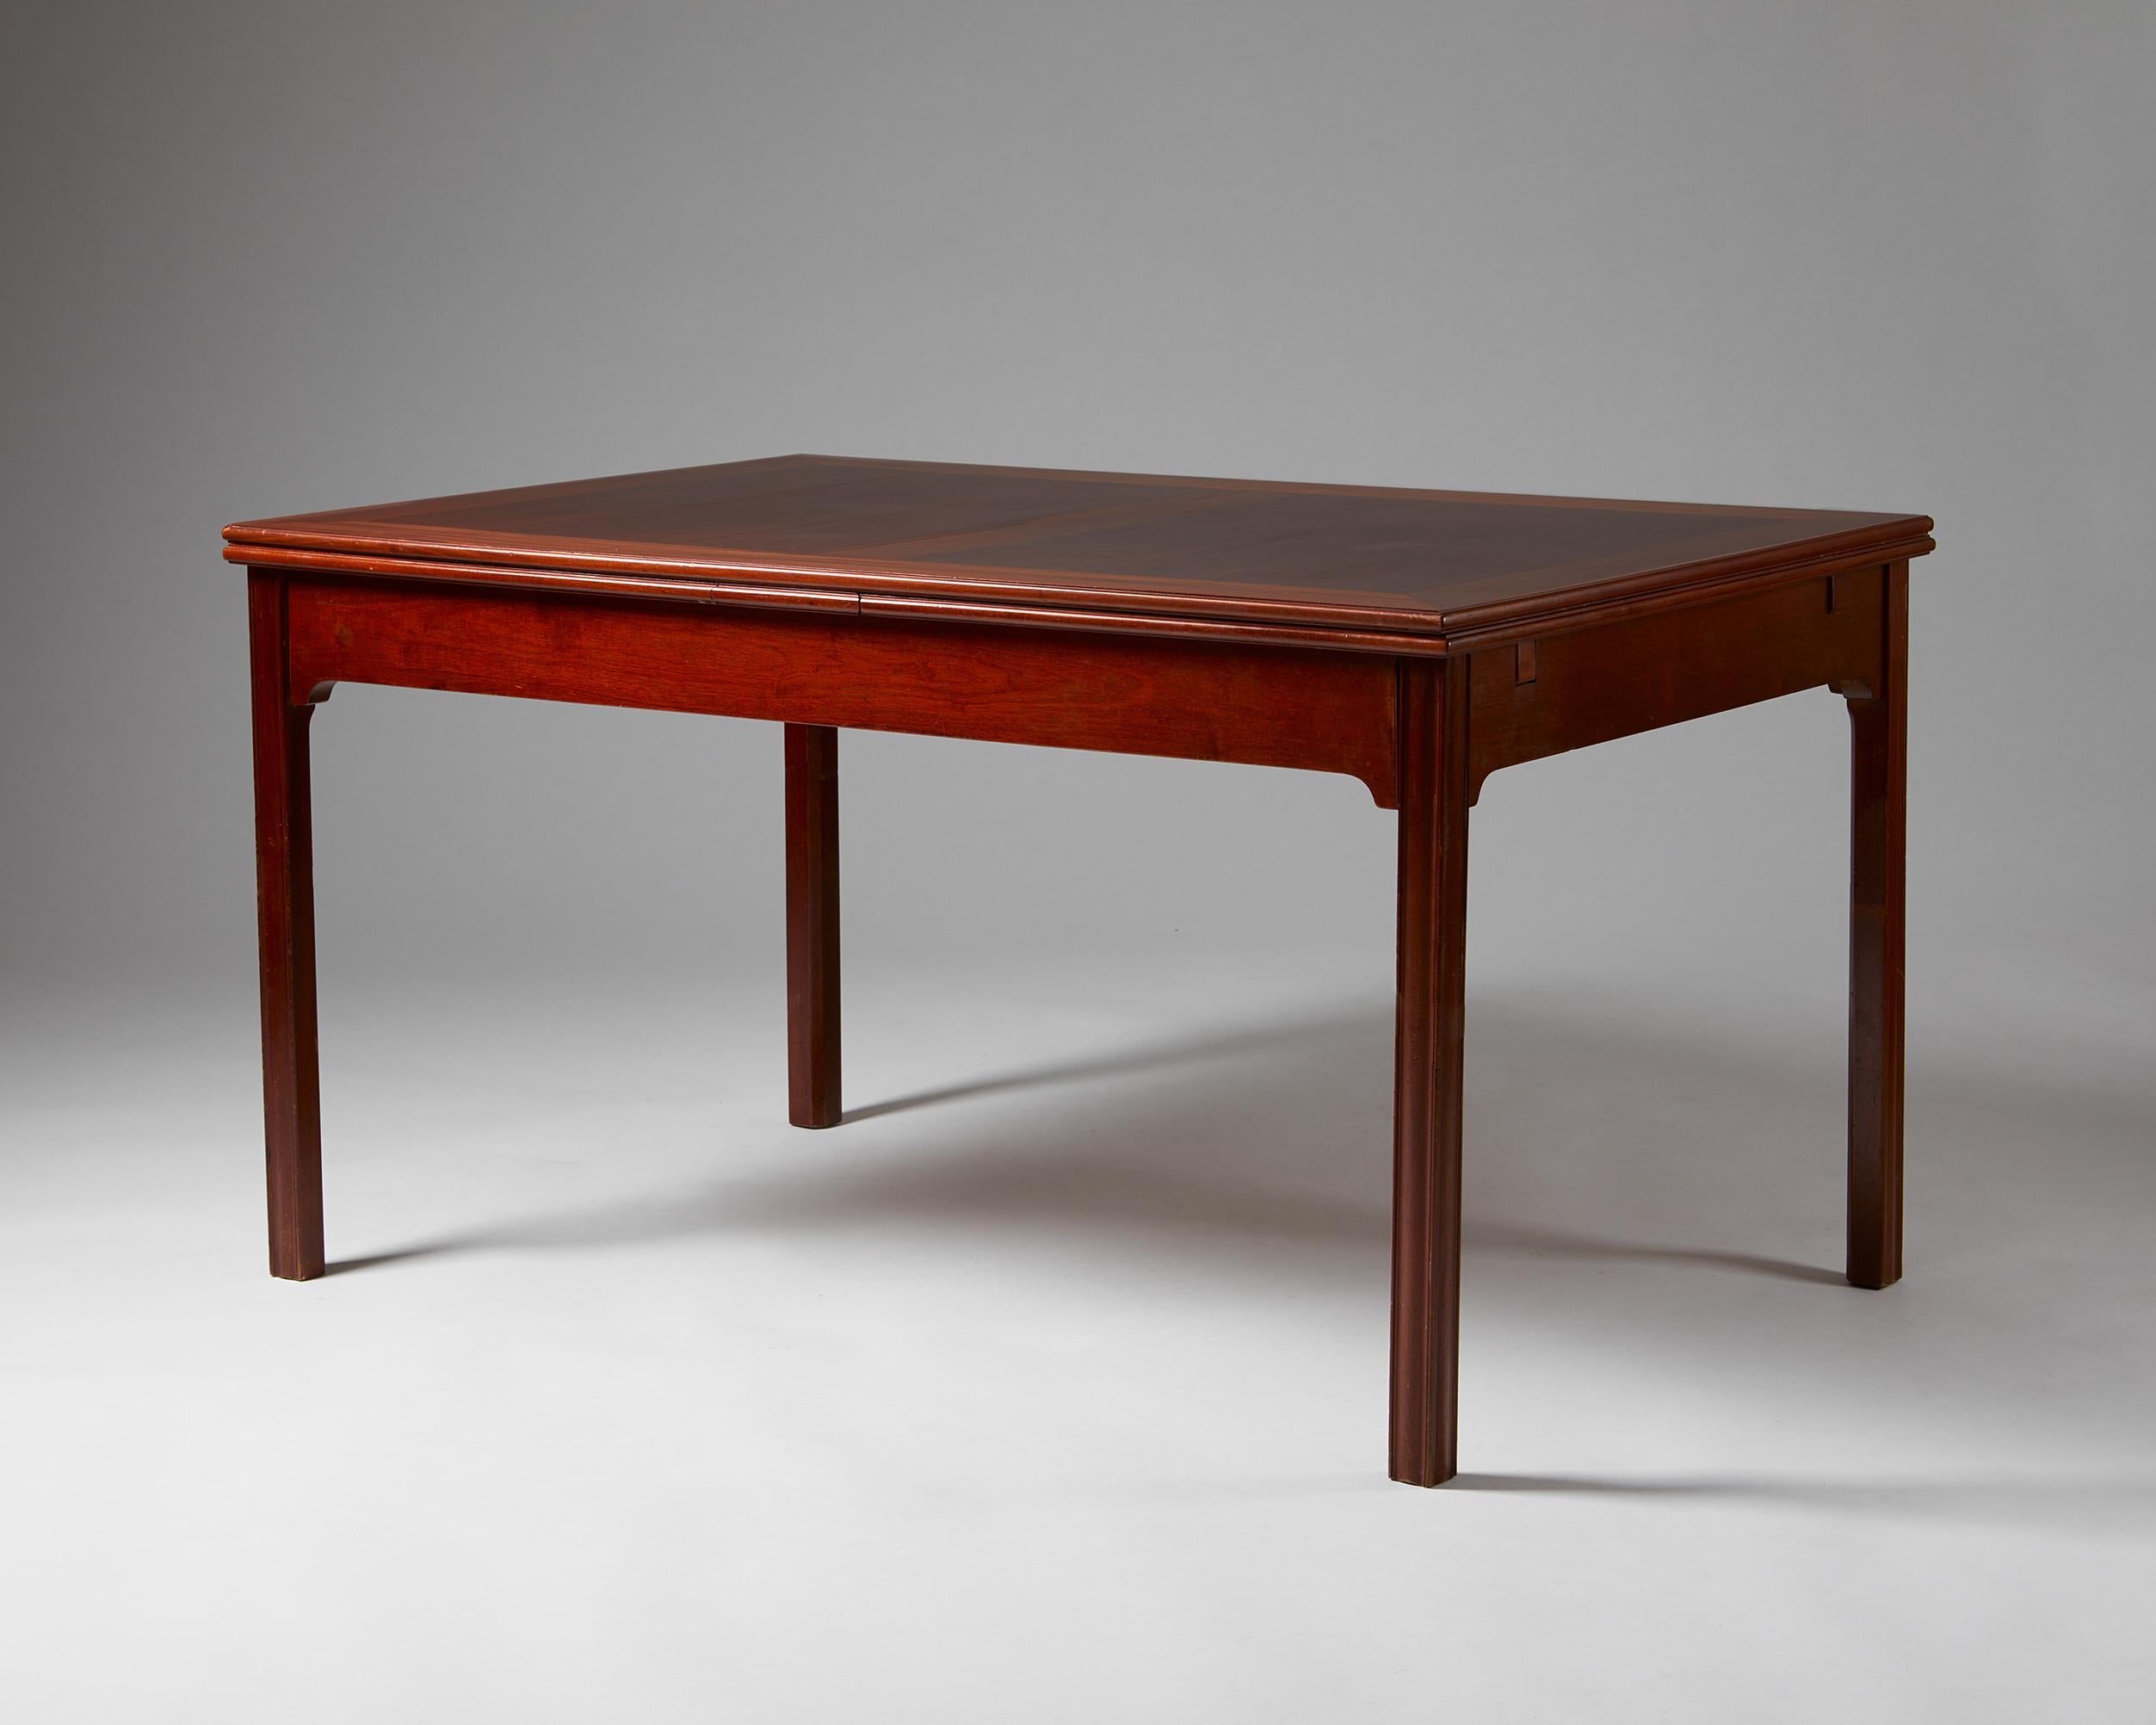 Dining table designed by Kaare Klint for Rud. Rasmussen,
Denmark. 1930s.
Mahogany.

Stamped.

This model is one of the rarest and finest dining tables by the Danish master Kaare Klint. Carefully chosen woodgrain textures frame each part of the